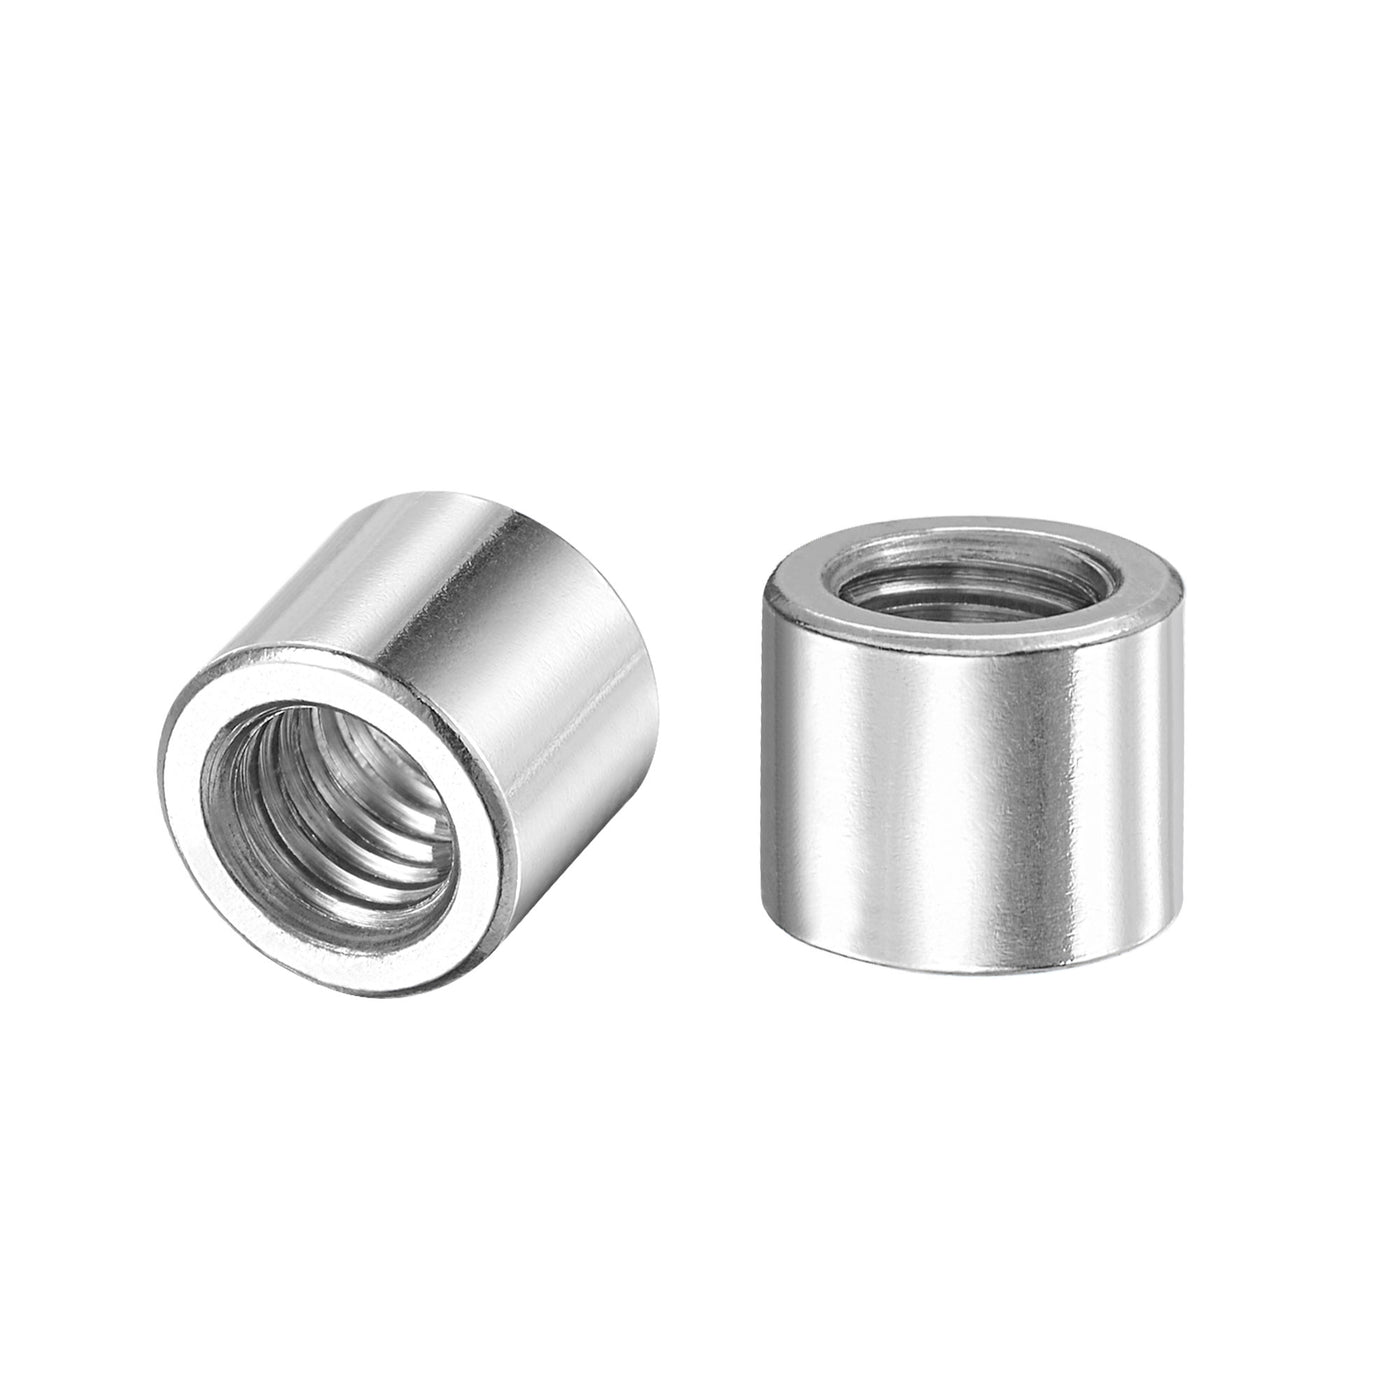 uxcell Uxcell Weld On Bung Nut Threaded 201 Stainless Steel Insert